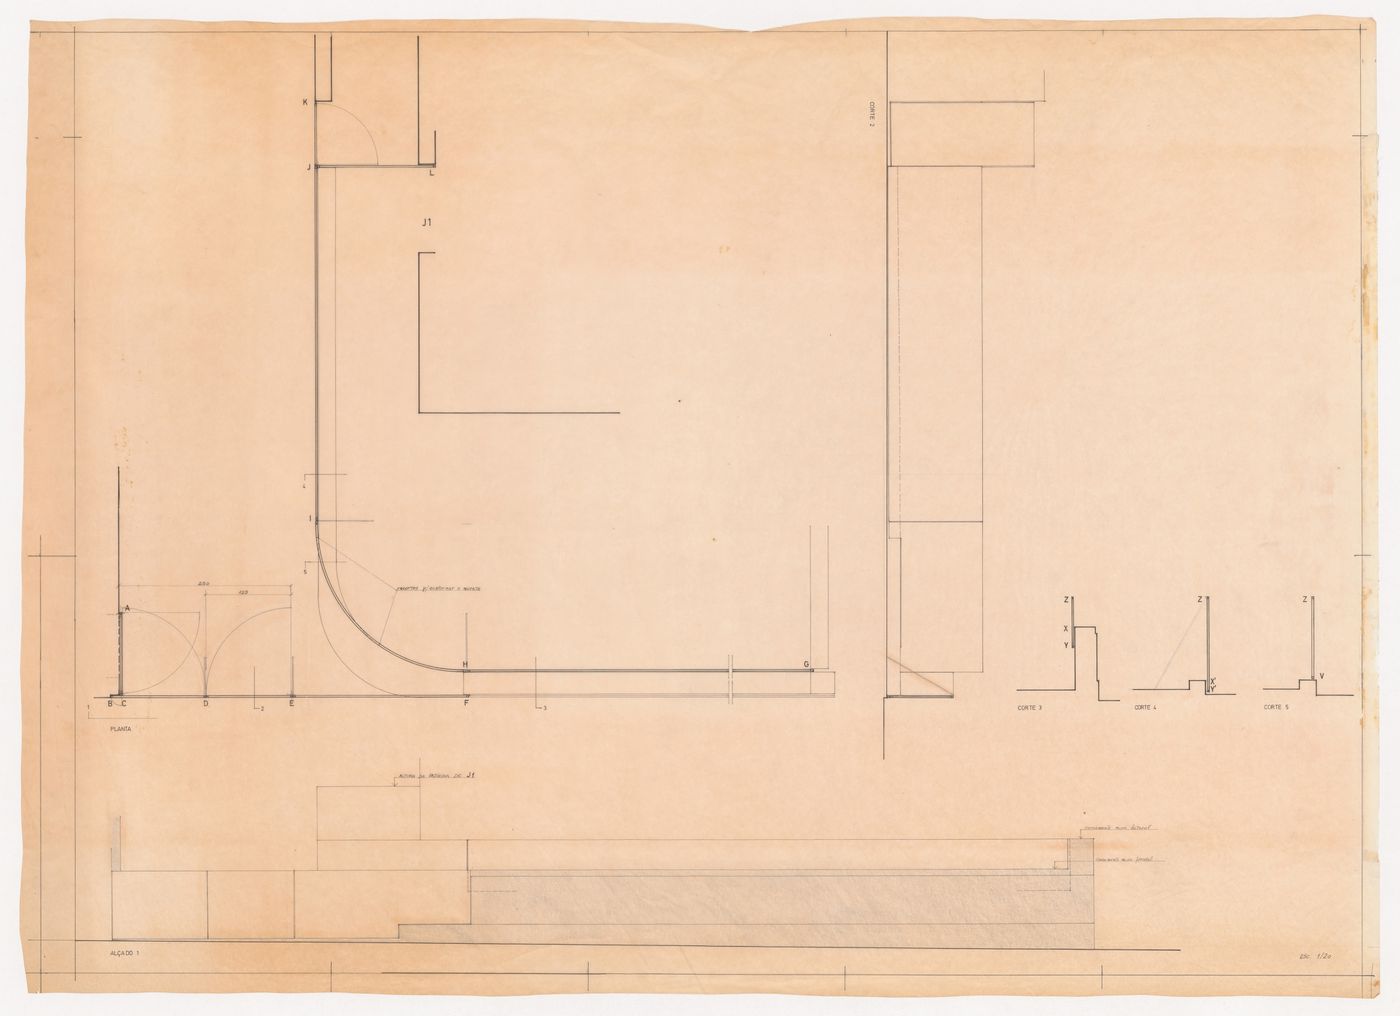 Plan, elevation and sections for the external wall for Casa Manuel Magalhães, Porto